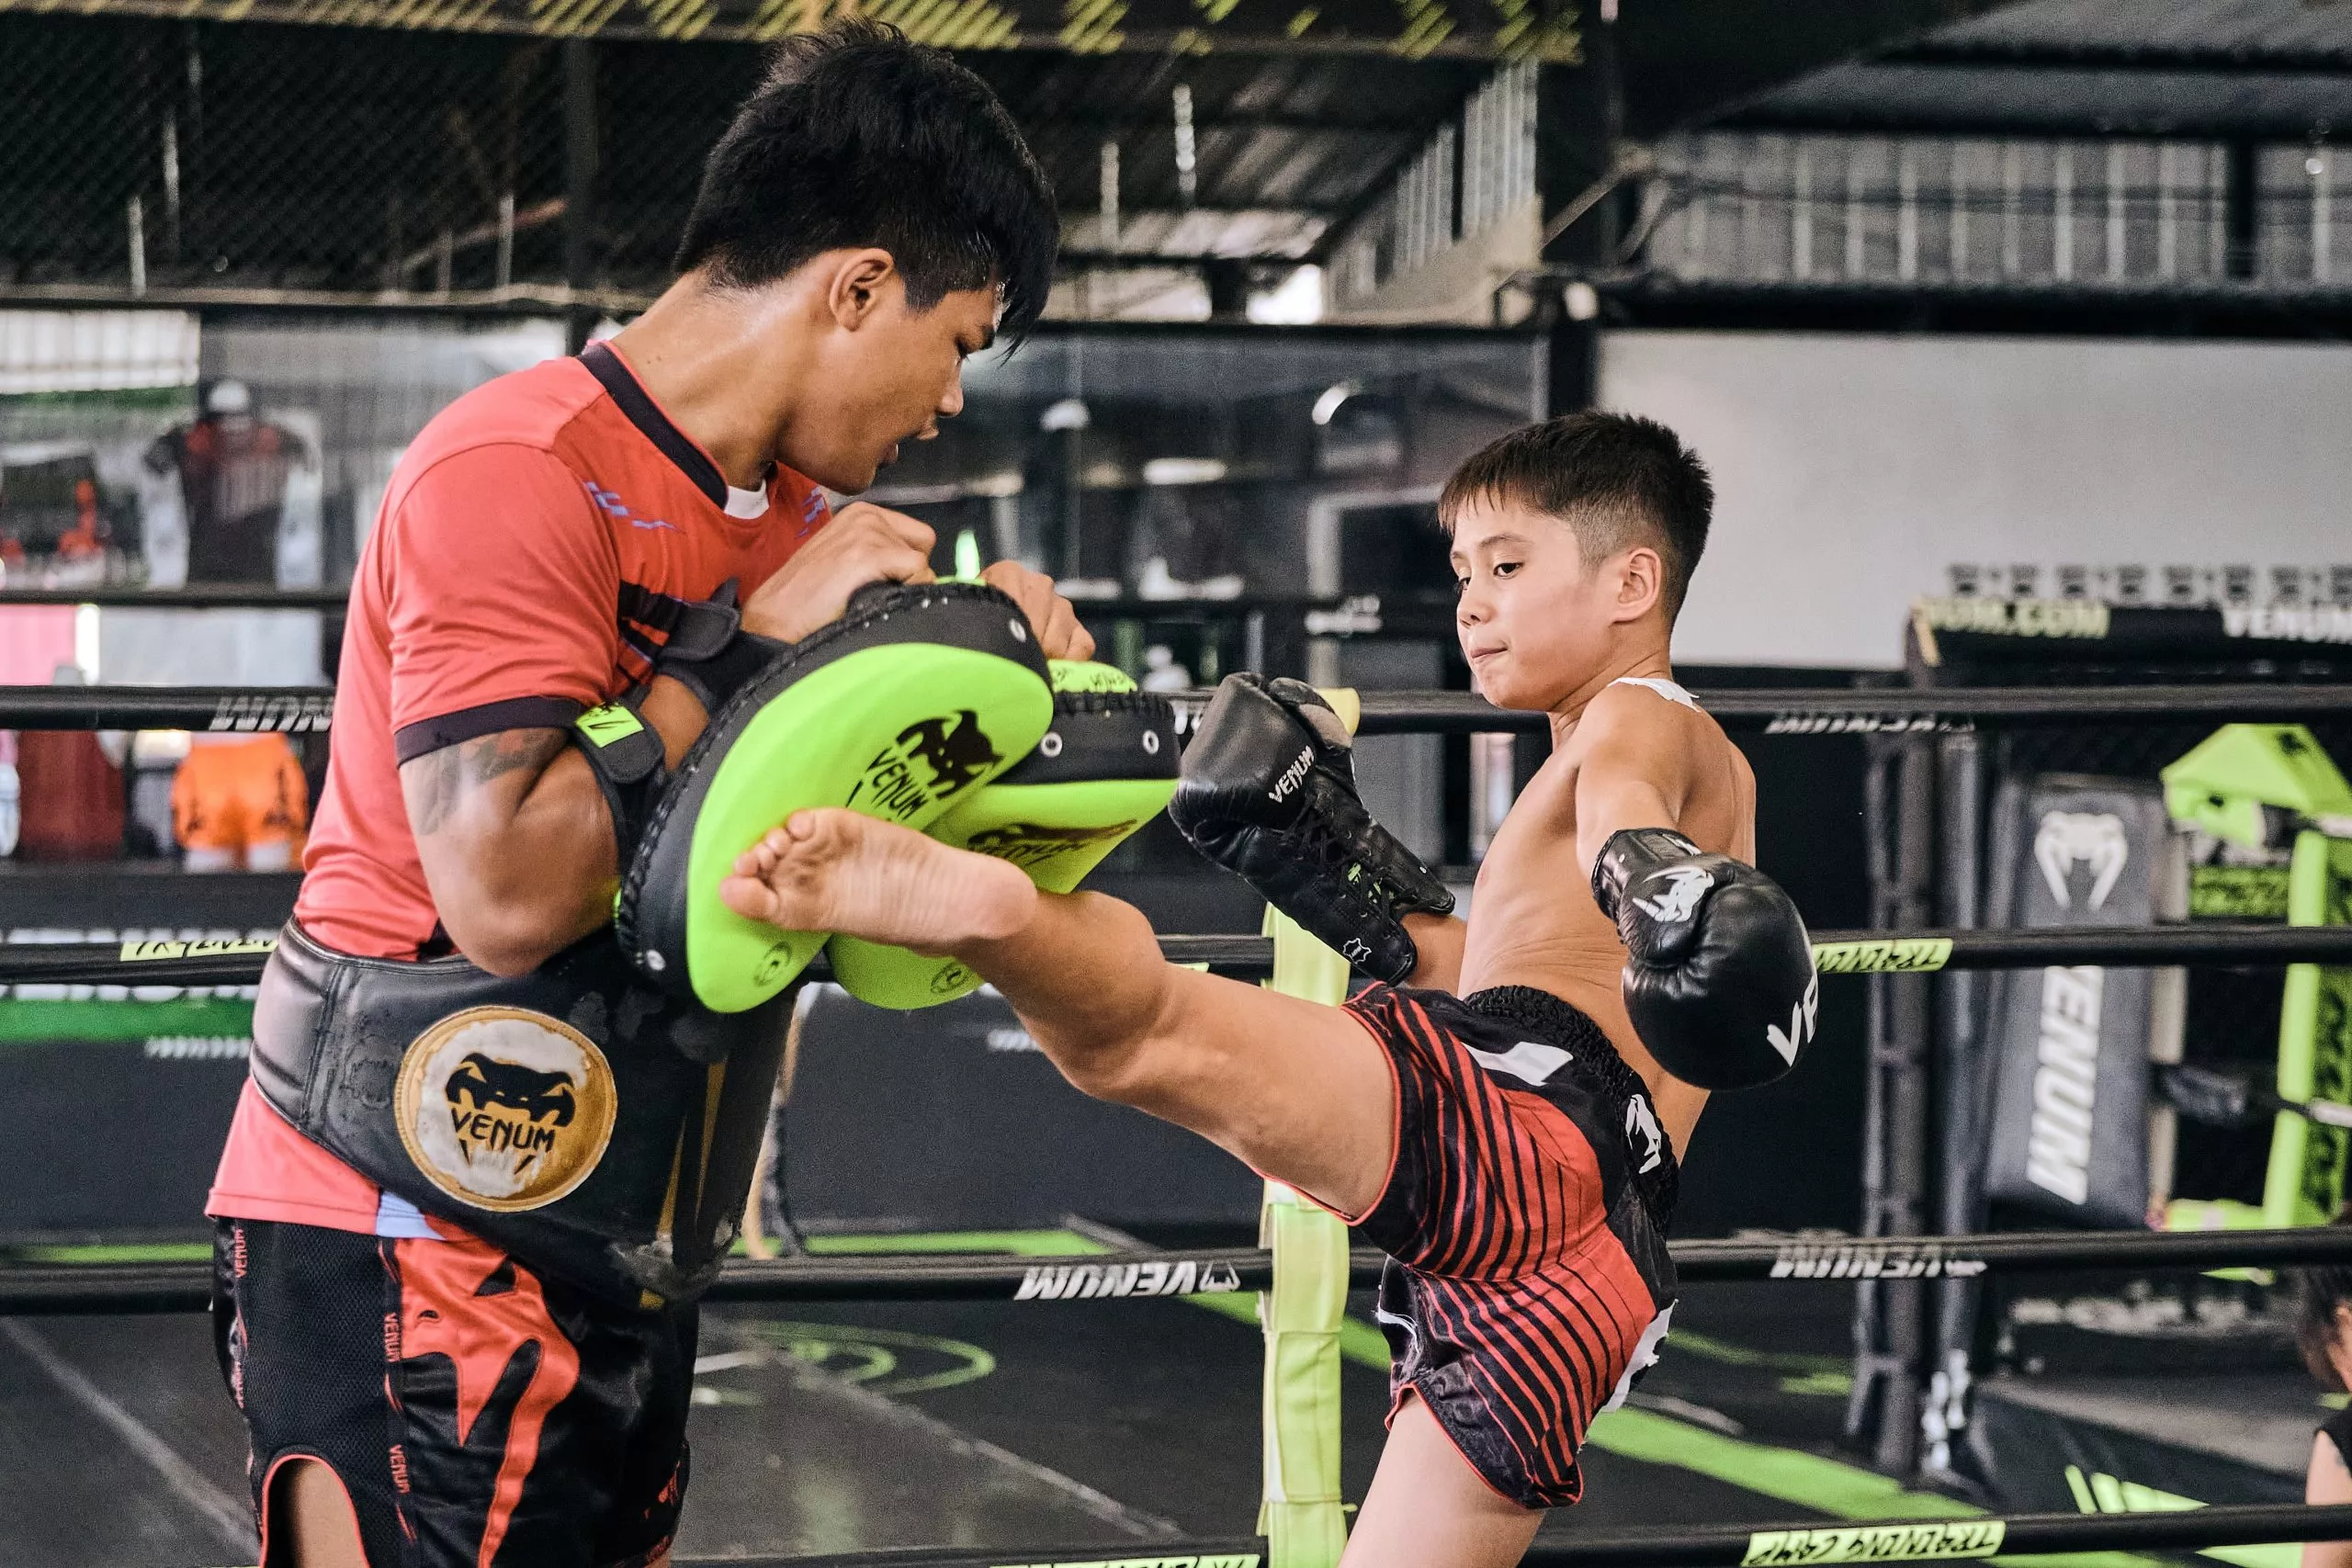 Top Fight Muay Thai in Thailand, Central Asia | Martial Arts - Rated 1